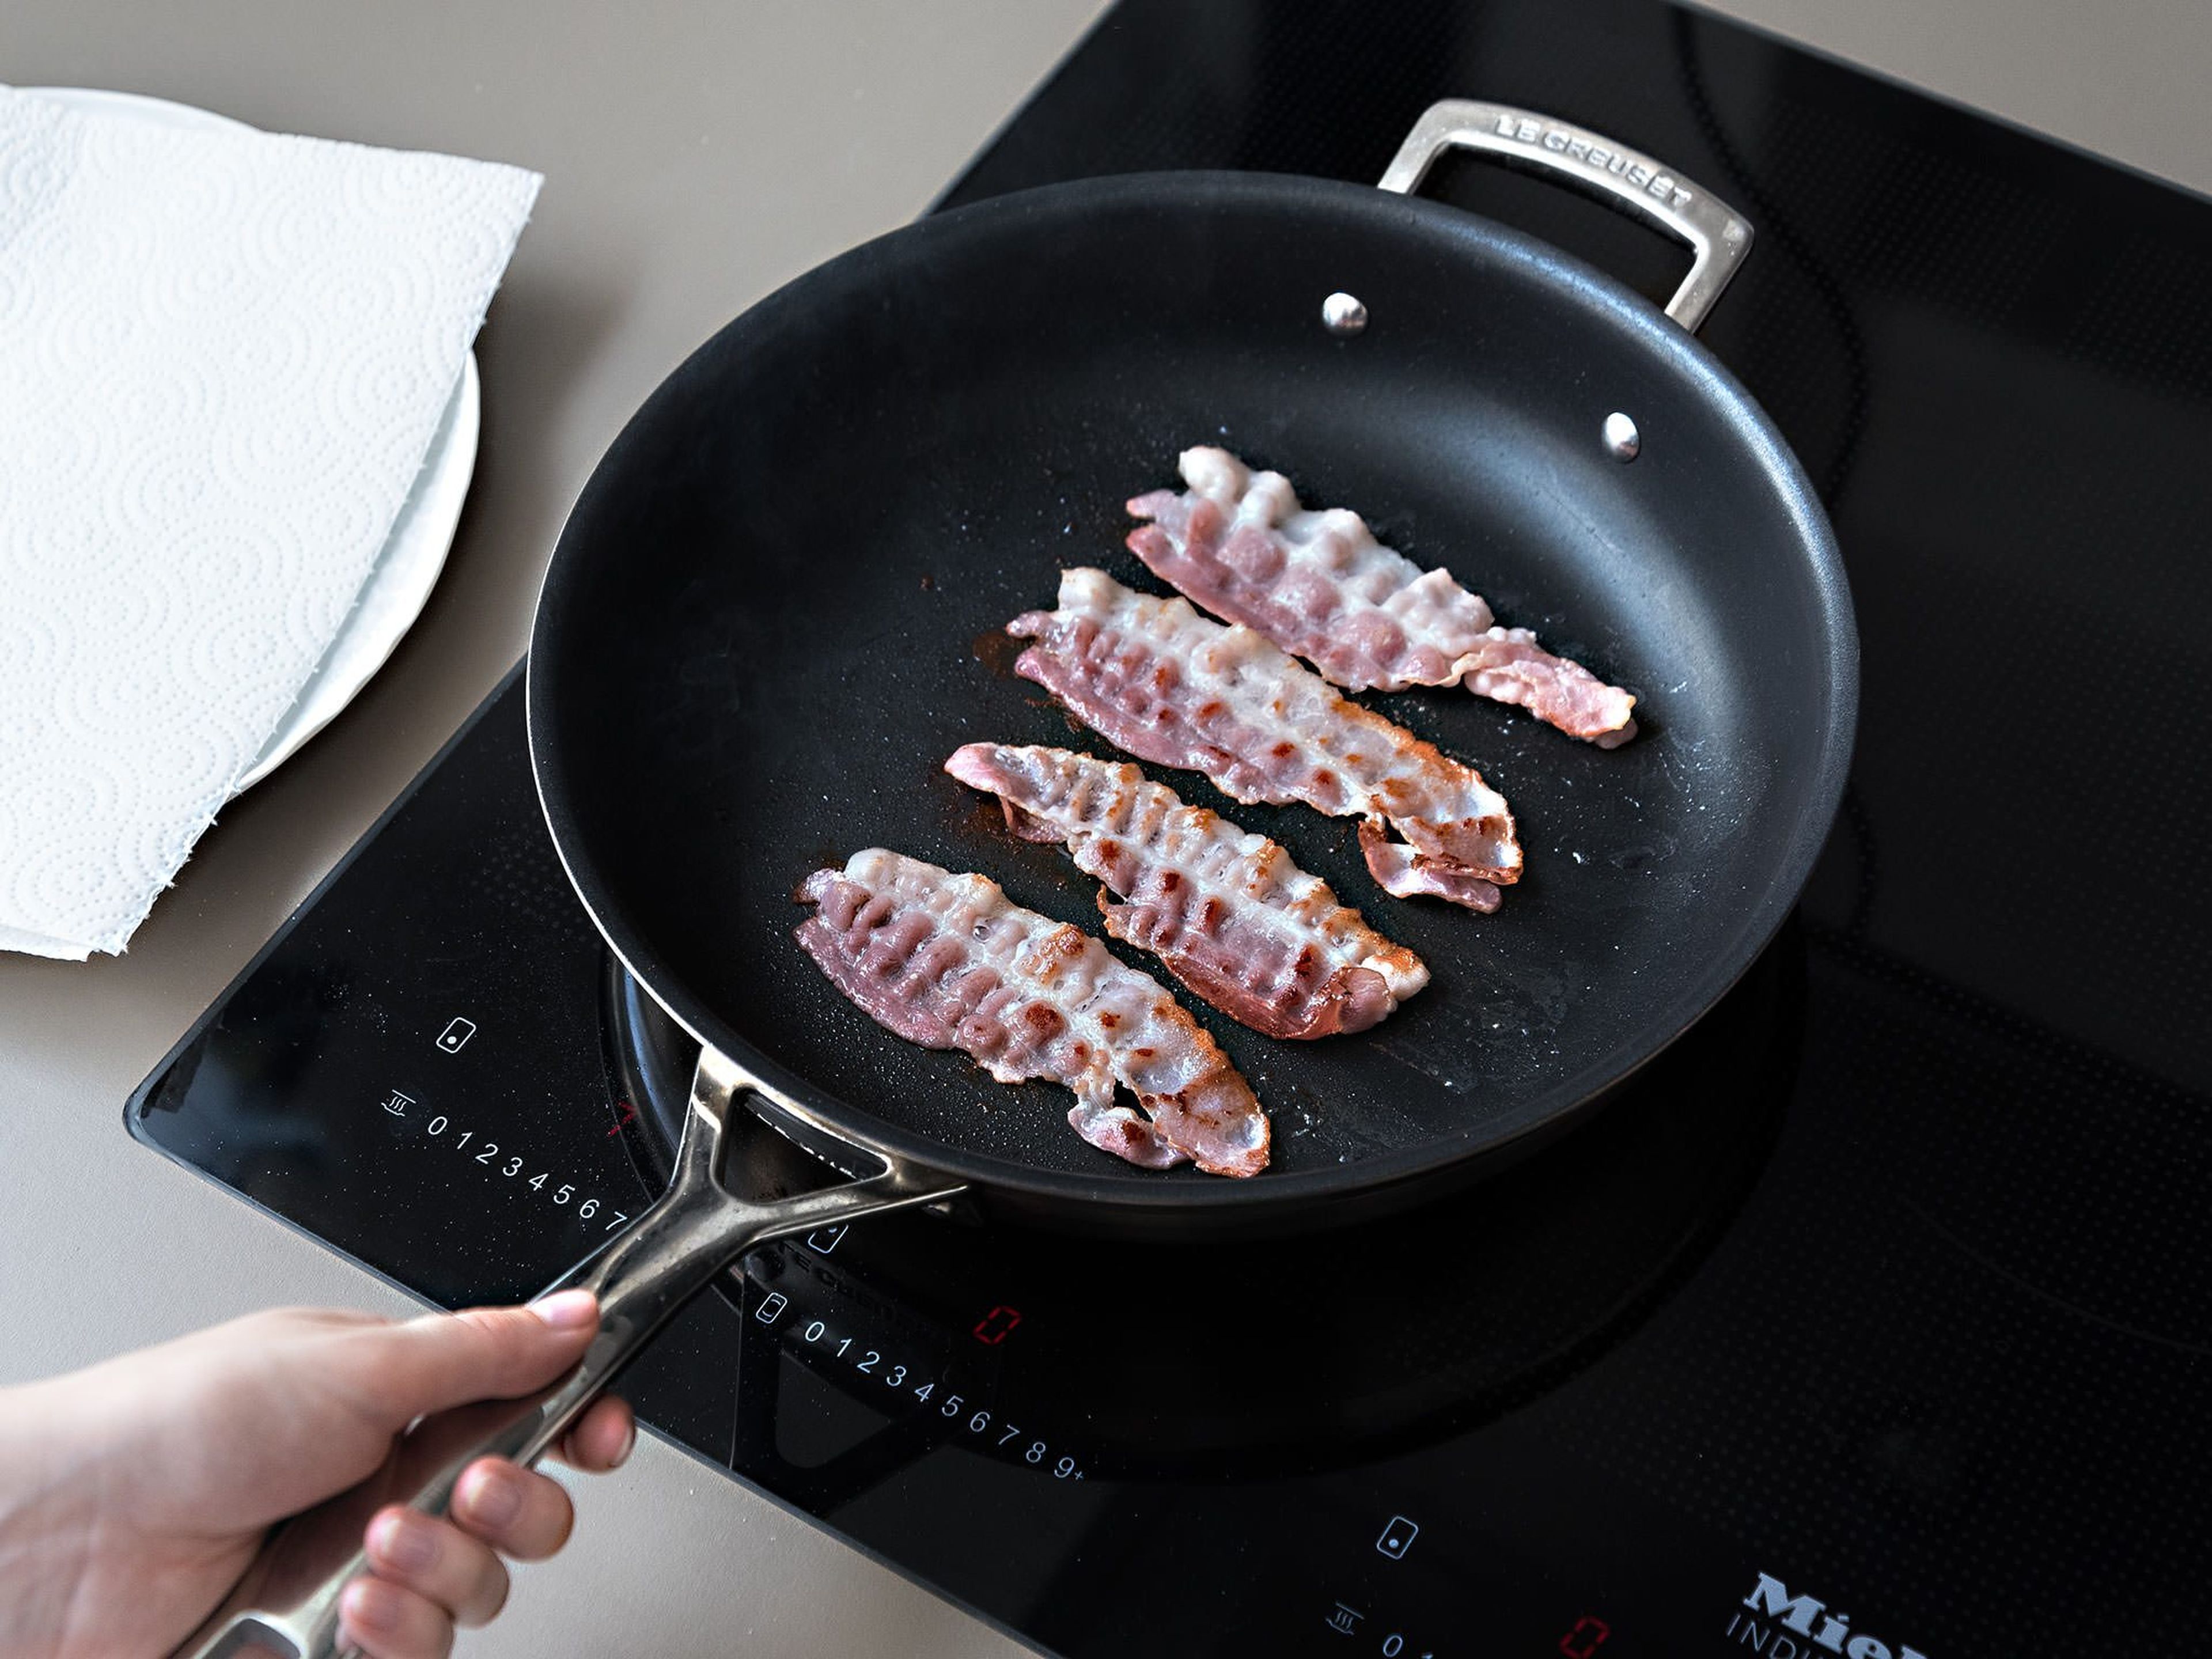 Meanwhile, fry the bacon both sides until crisp, then remove bacon from the pan. Add remaining butter and honey to pan with rendered bacon fat. Remove the carrots from the oven and toss them in the honey-butter mixture until they have become lightly caramelized.